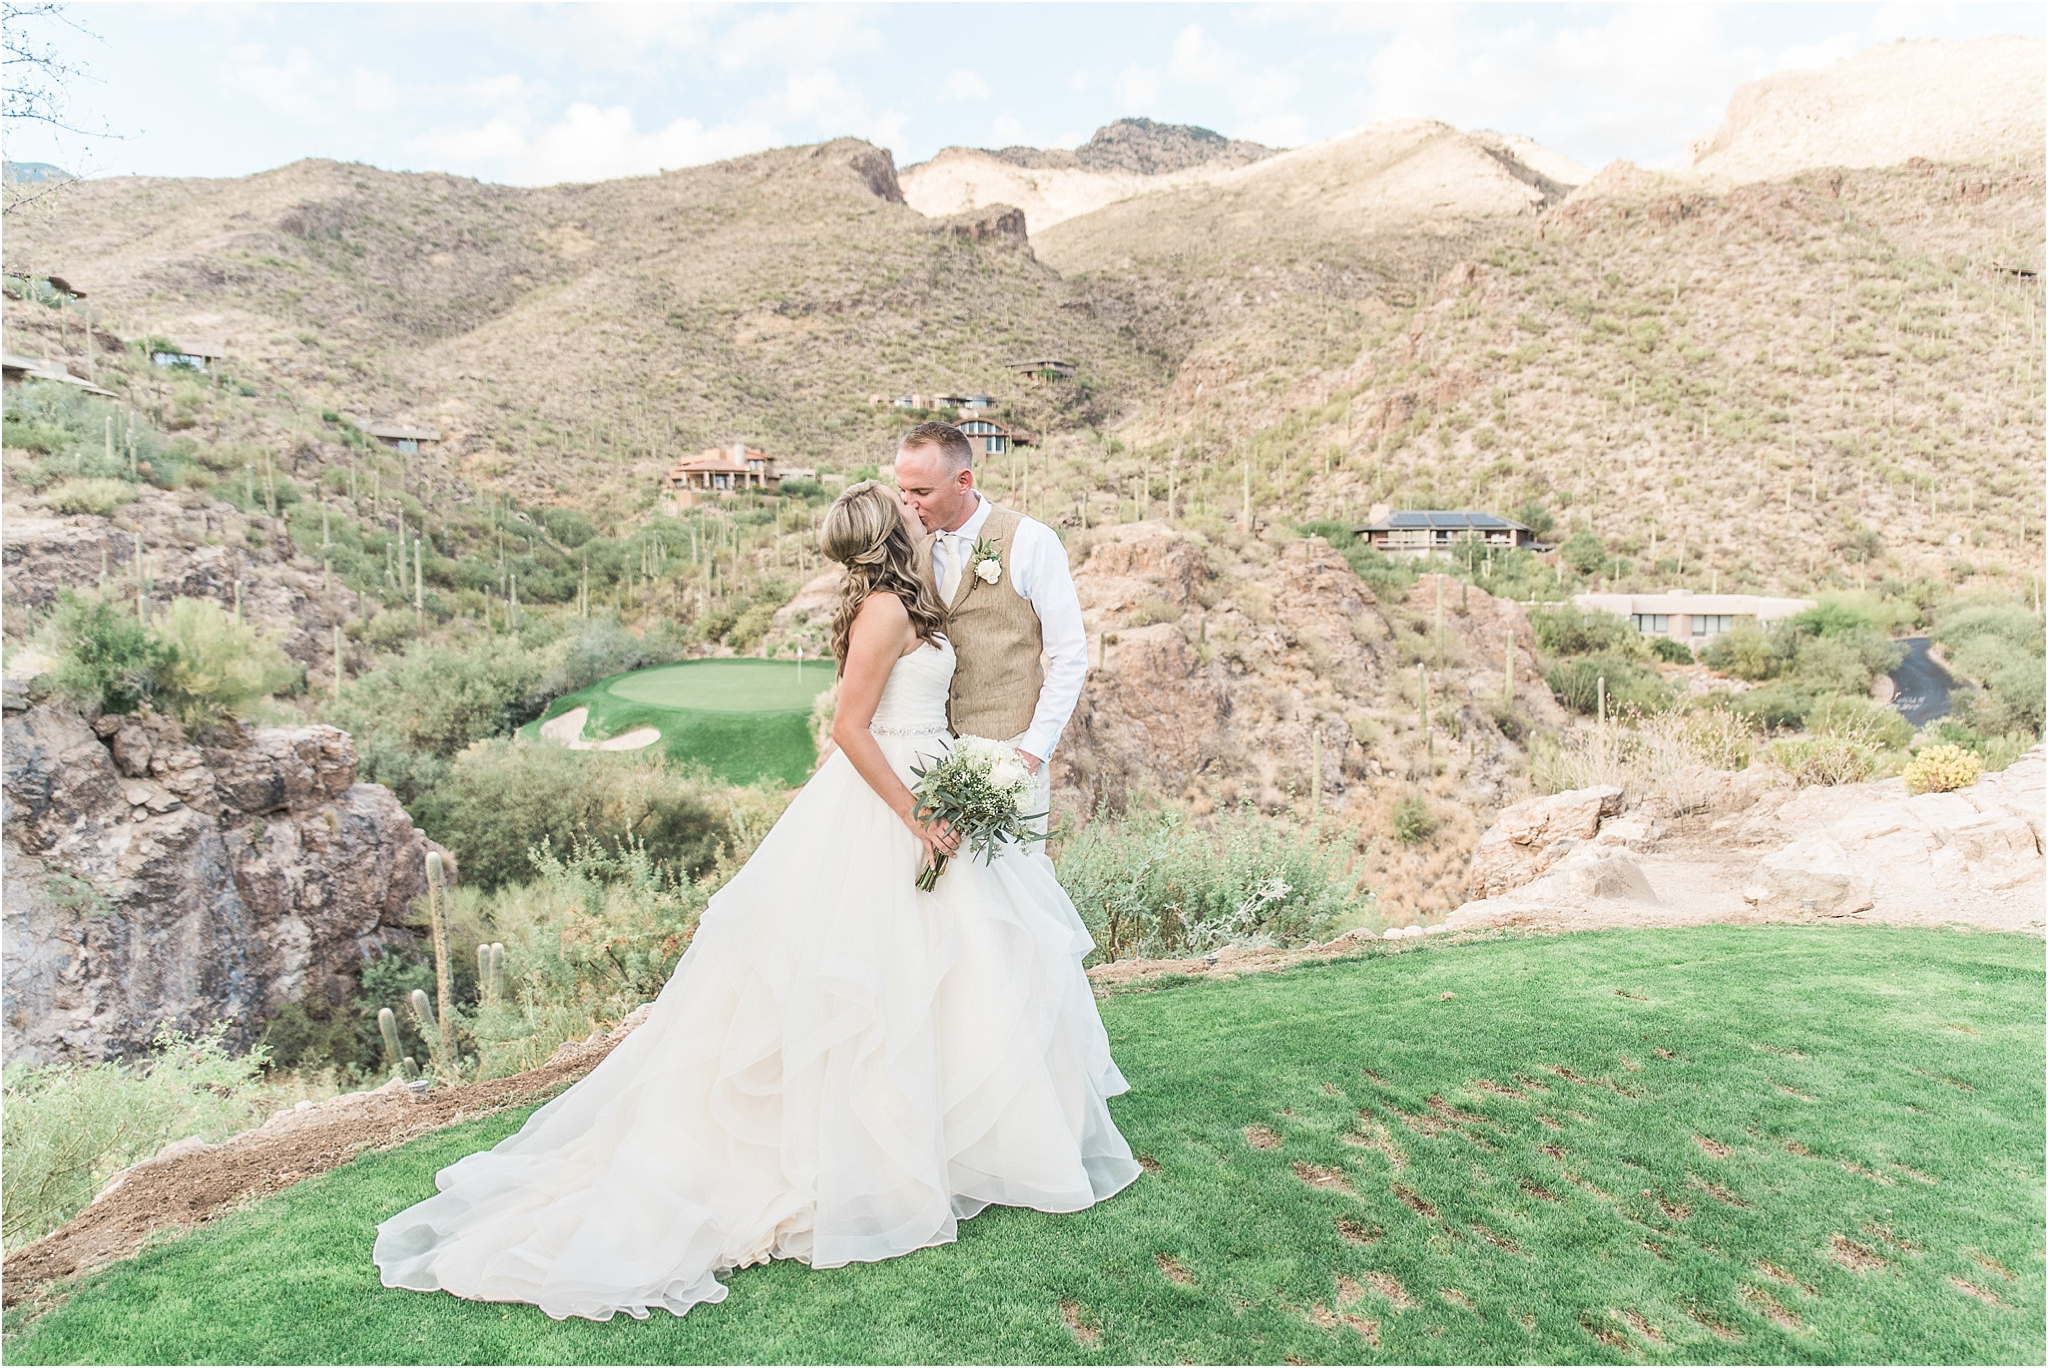 The Lodge at Ventana Canyon wedding photo of bride and groom at sunset